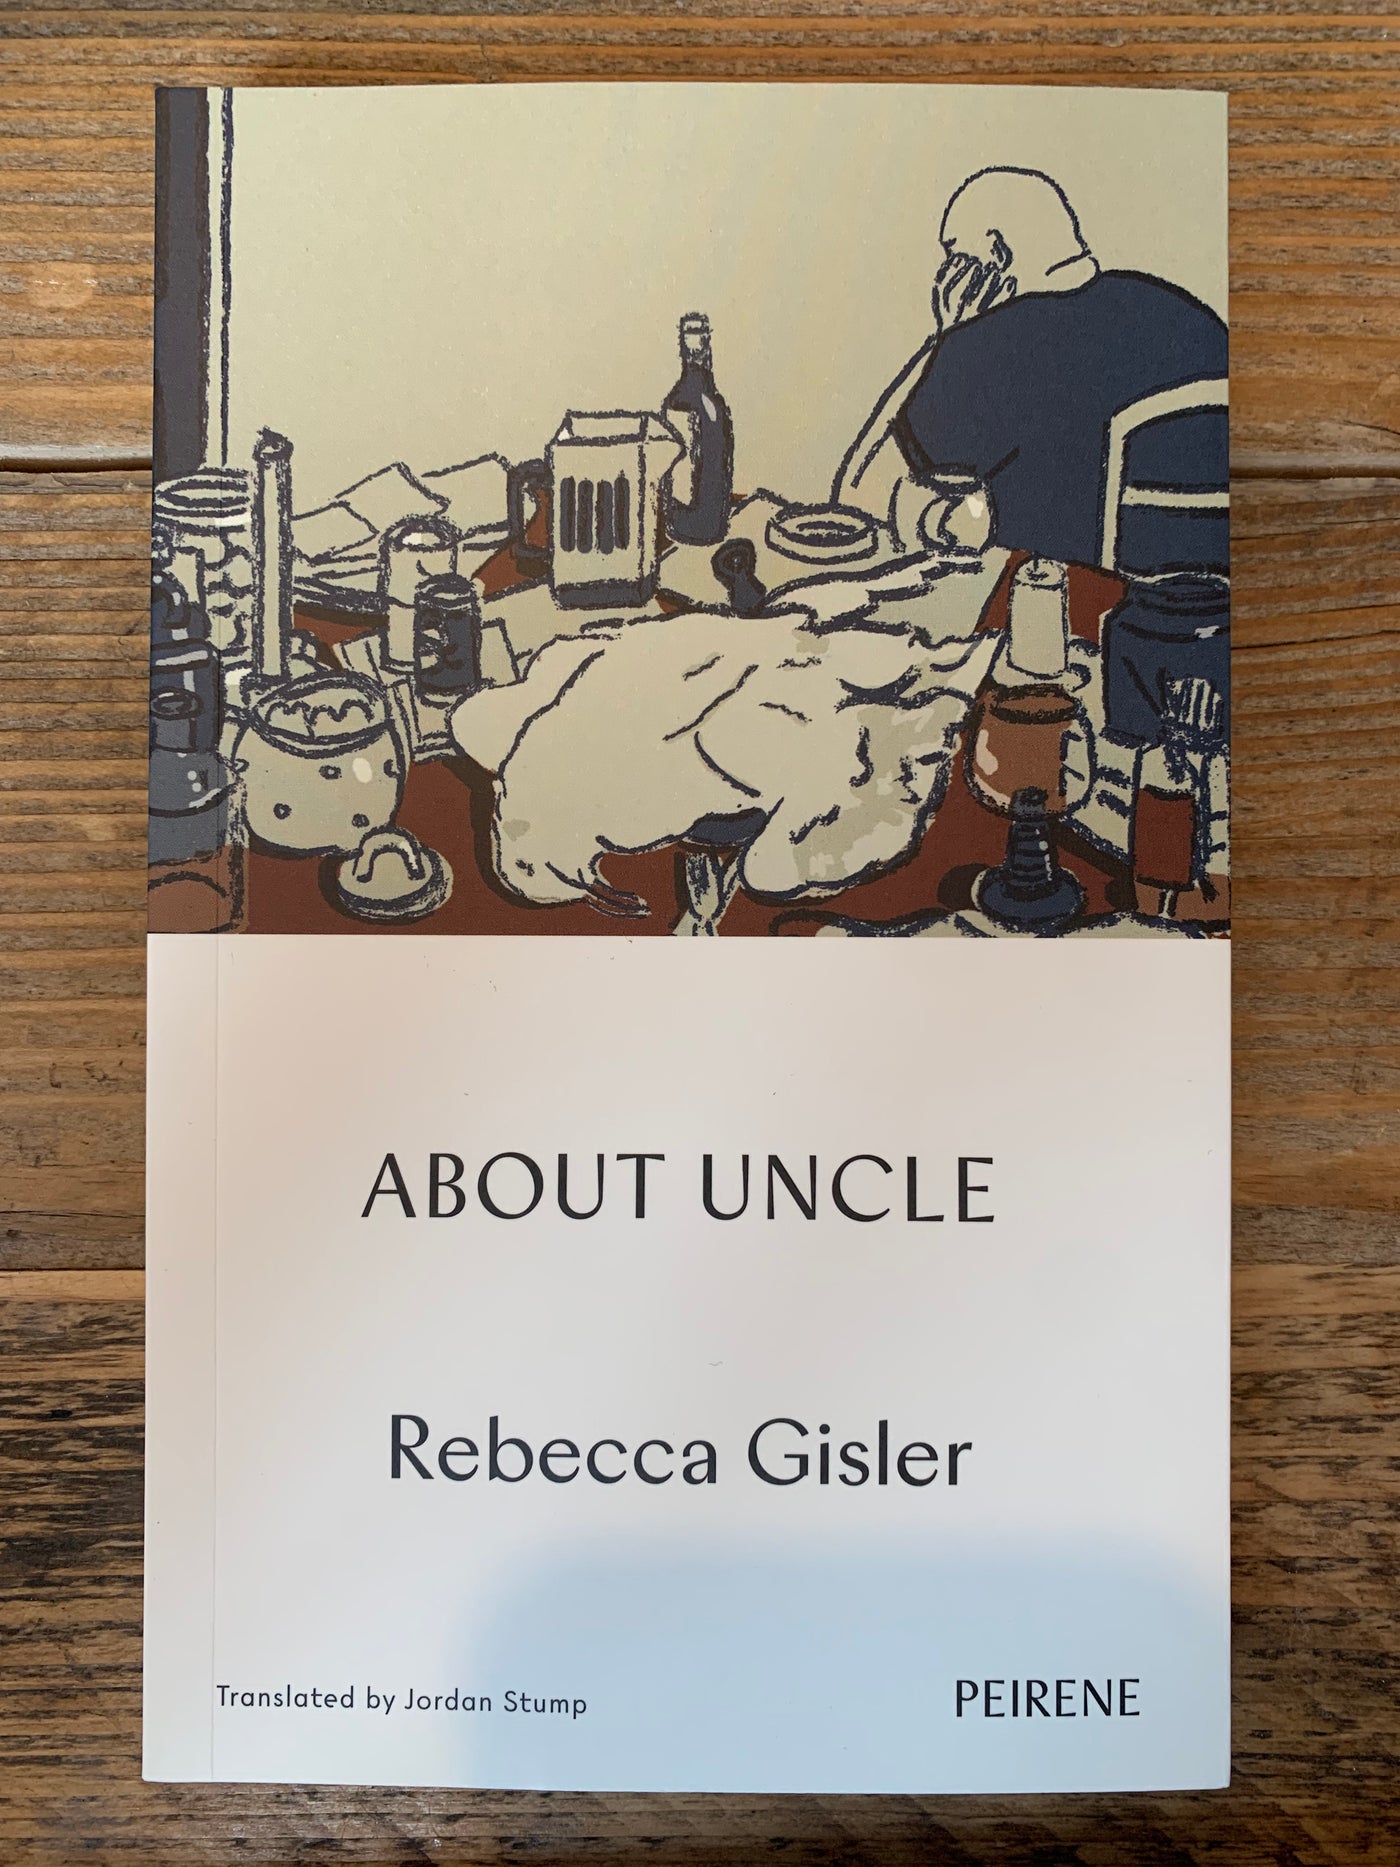 About Uncle